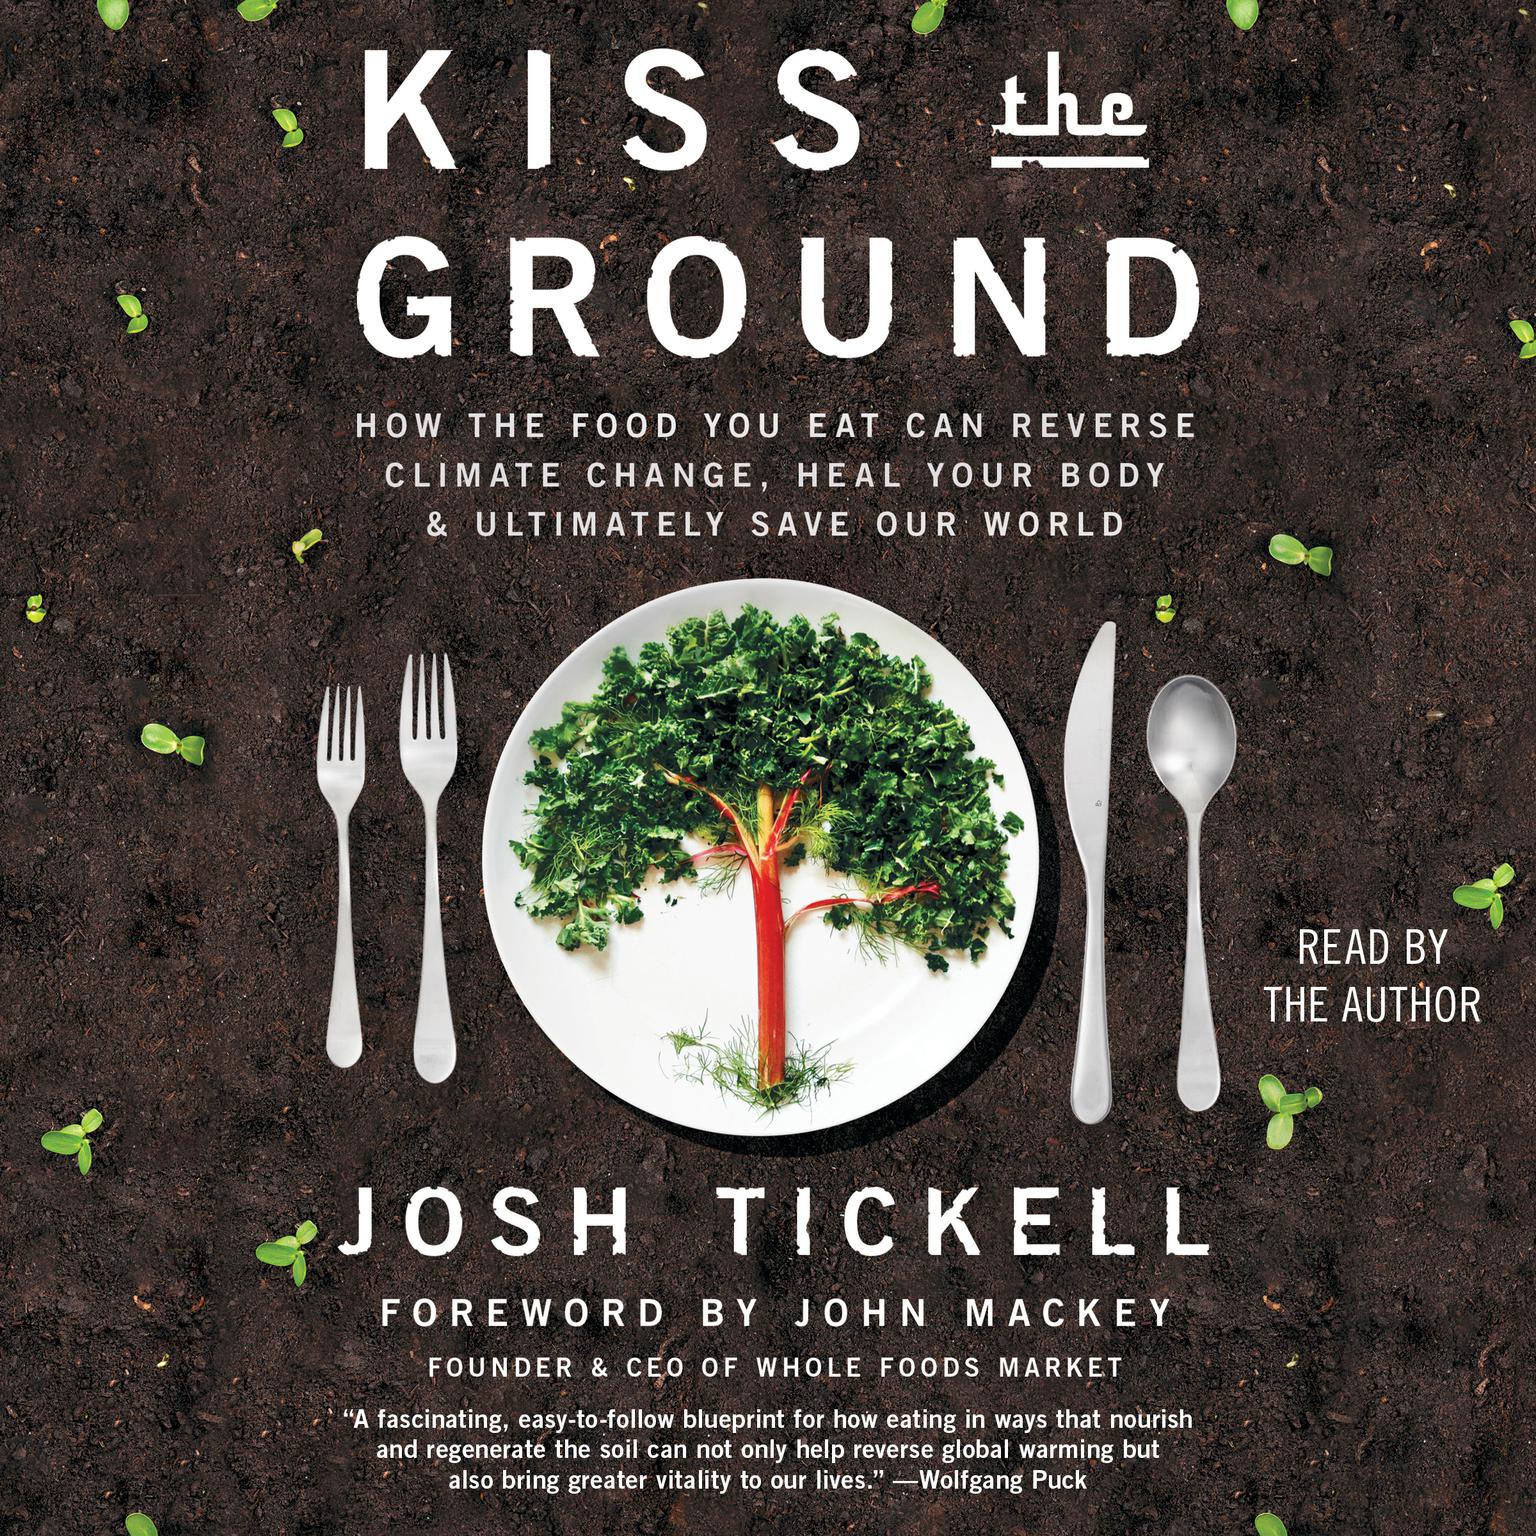 Kiss the Ground: How the Food You Eat Can Reverse Climate Change, Heal Your Body & Ultimately Save Our World Audiobook, by Josh Tickell